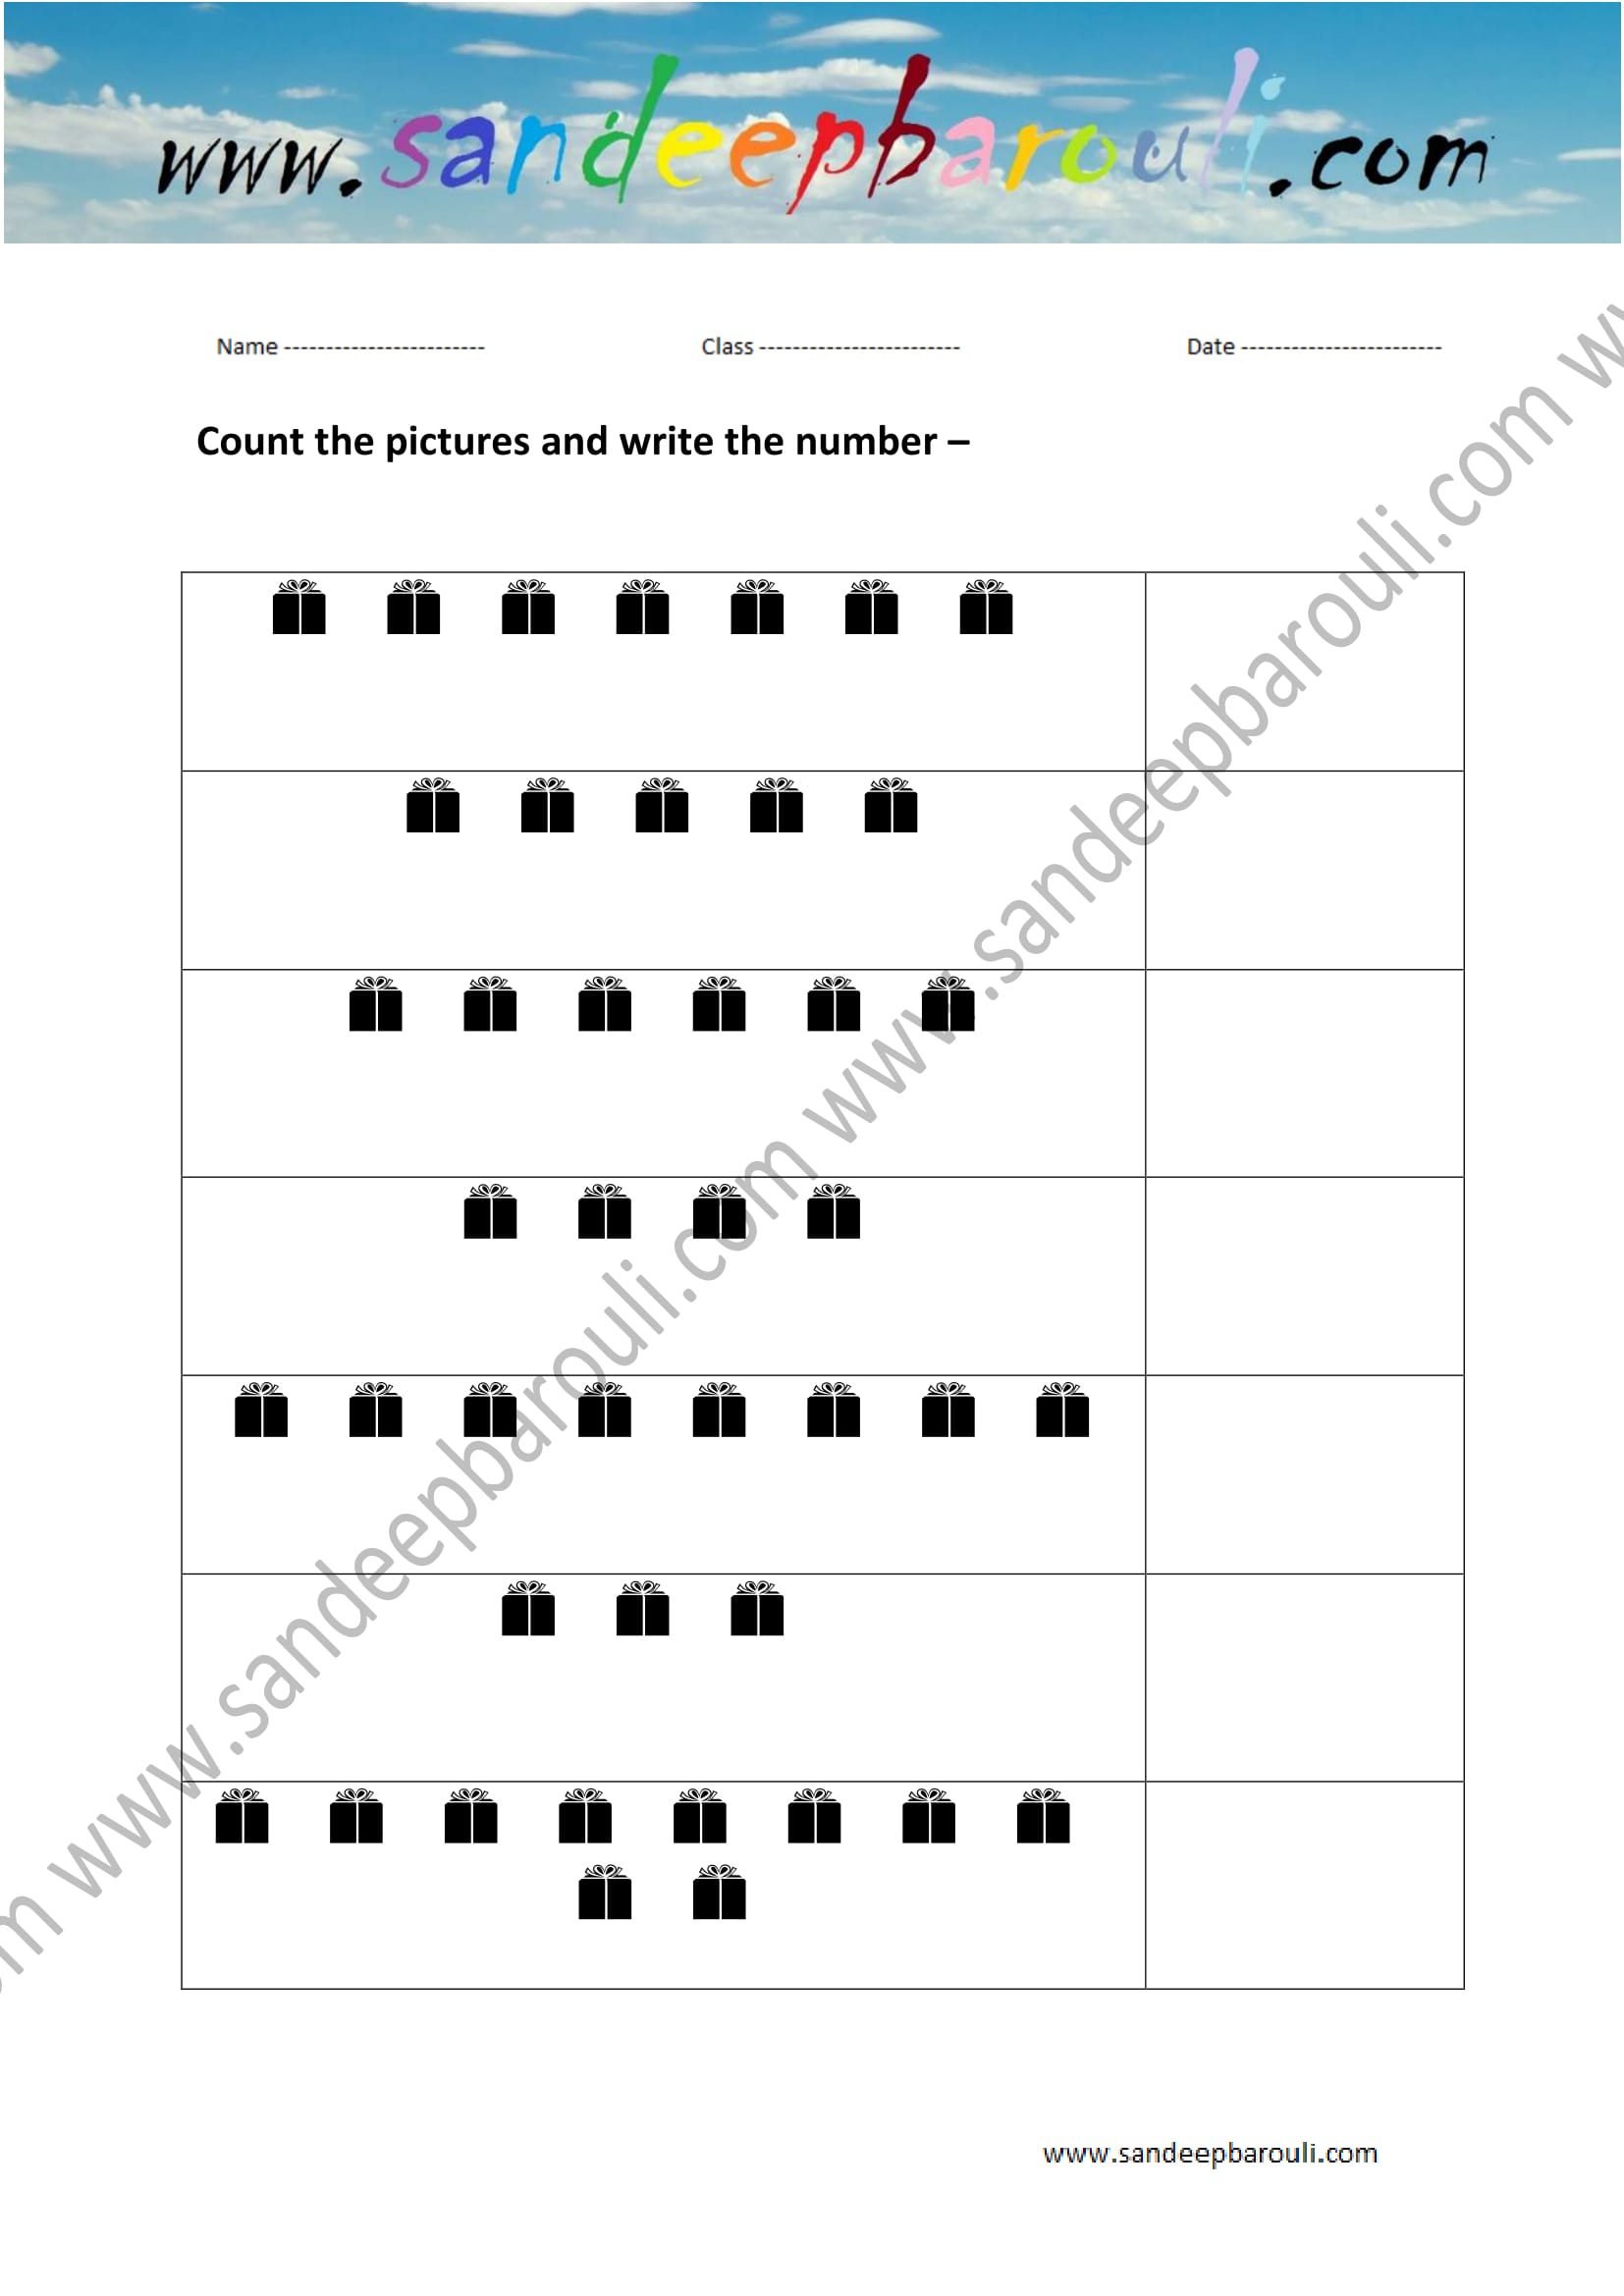 Count the Picture and Write the Number Worksheet (11)